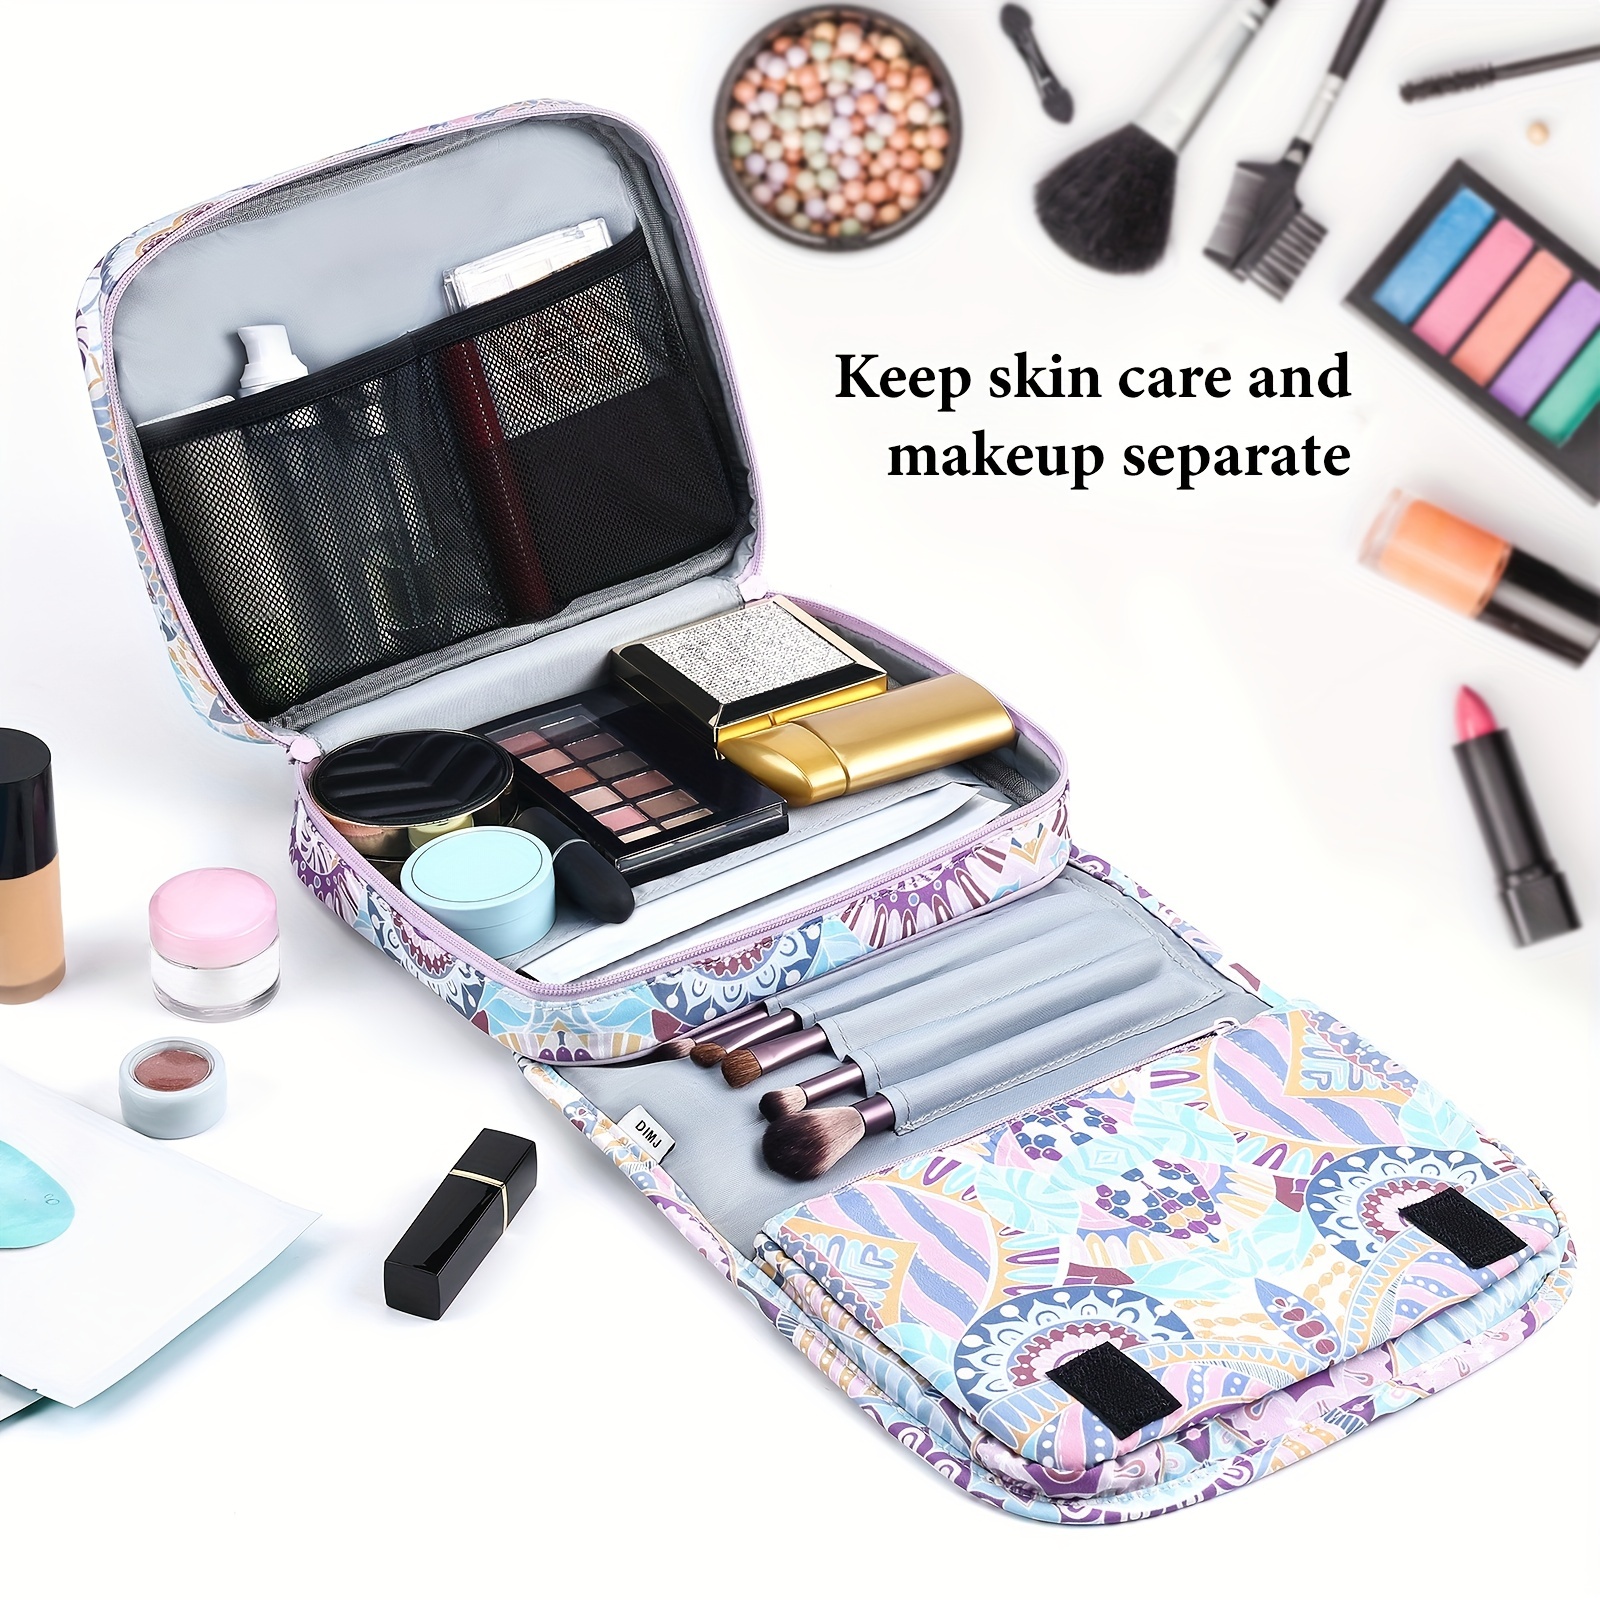 DIMJ Makeup bag and Jewelry Bag for Women, Large Make Up Bag Organizer with  Compartments Waterproof Makeup Bag and Jewelry Bag for Women (Black)